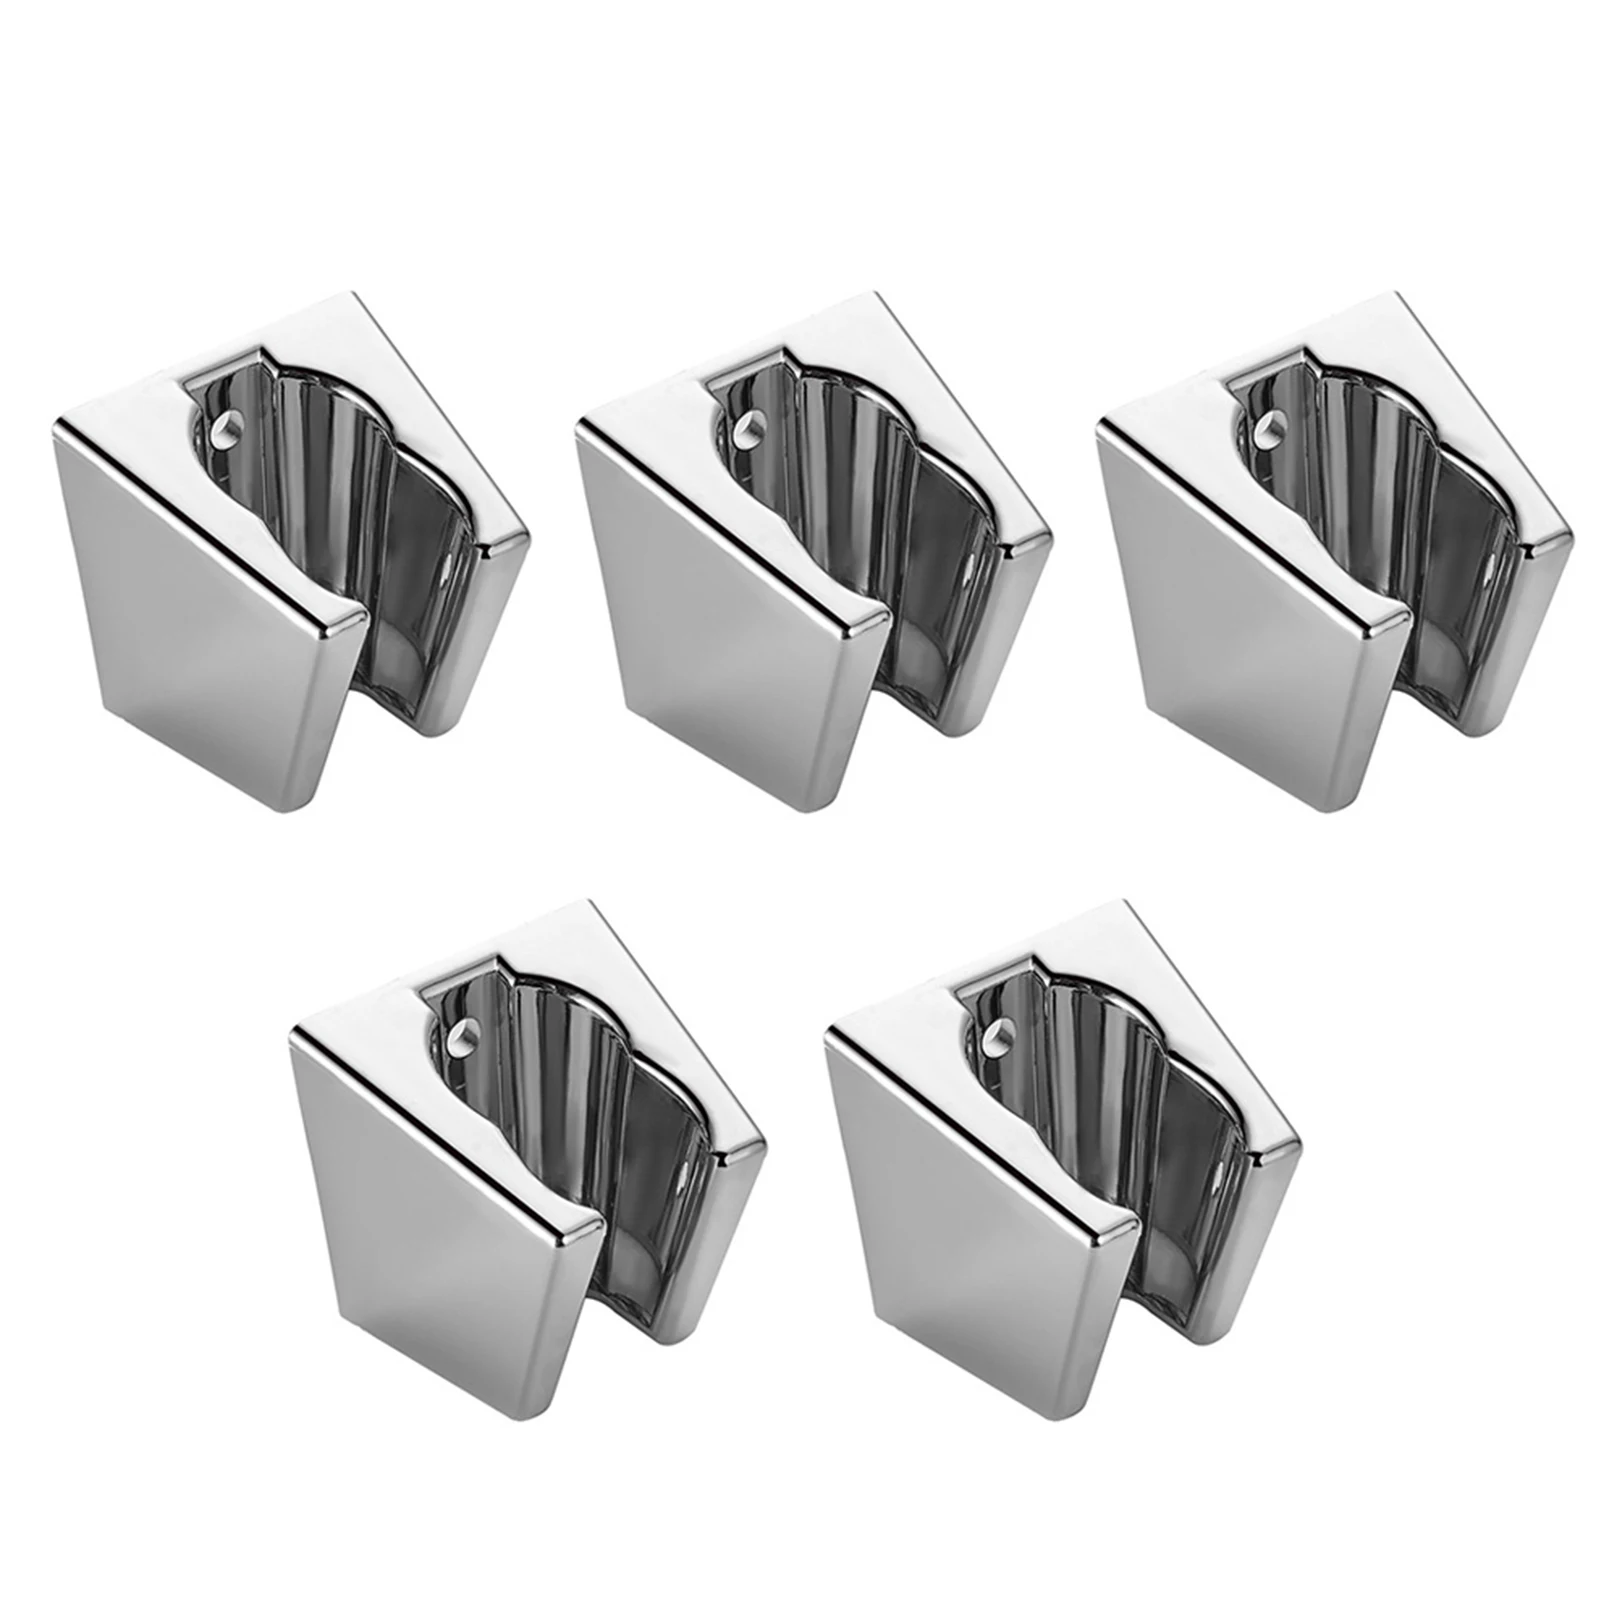 

5pcs With Screws Wall Mounted Hand Sprayer G1/2 Brushed ABS Storage Bracket Simple Shower Head Holder Silver Easy Install Modern